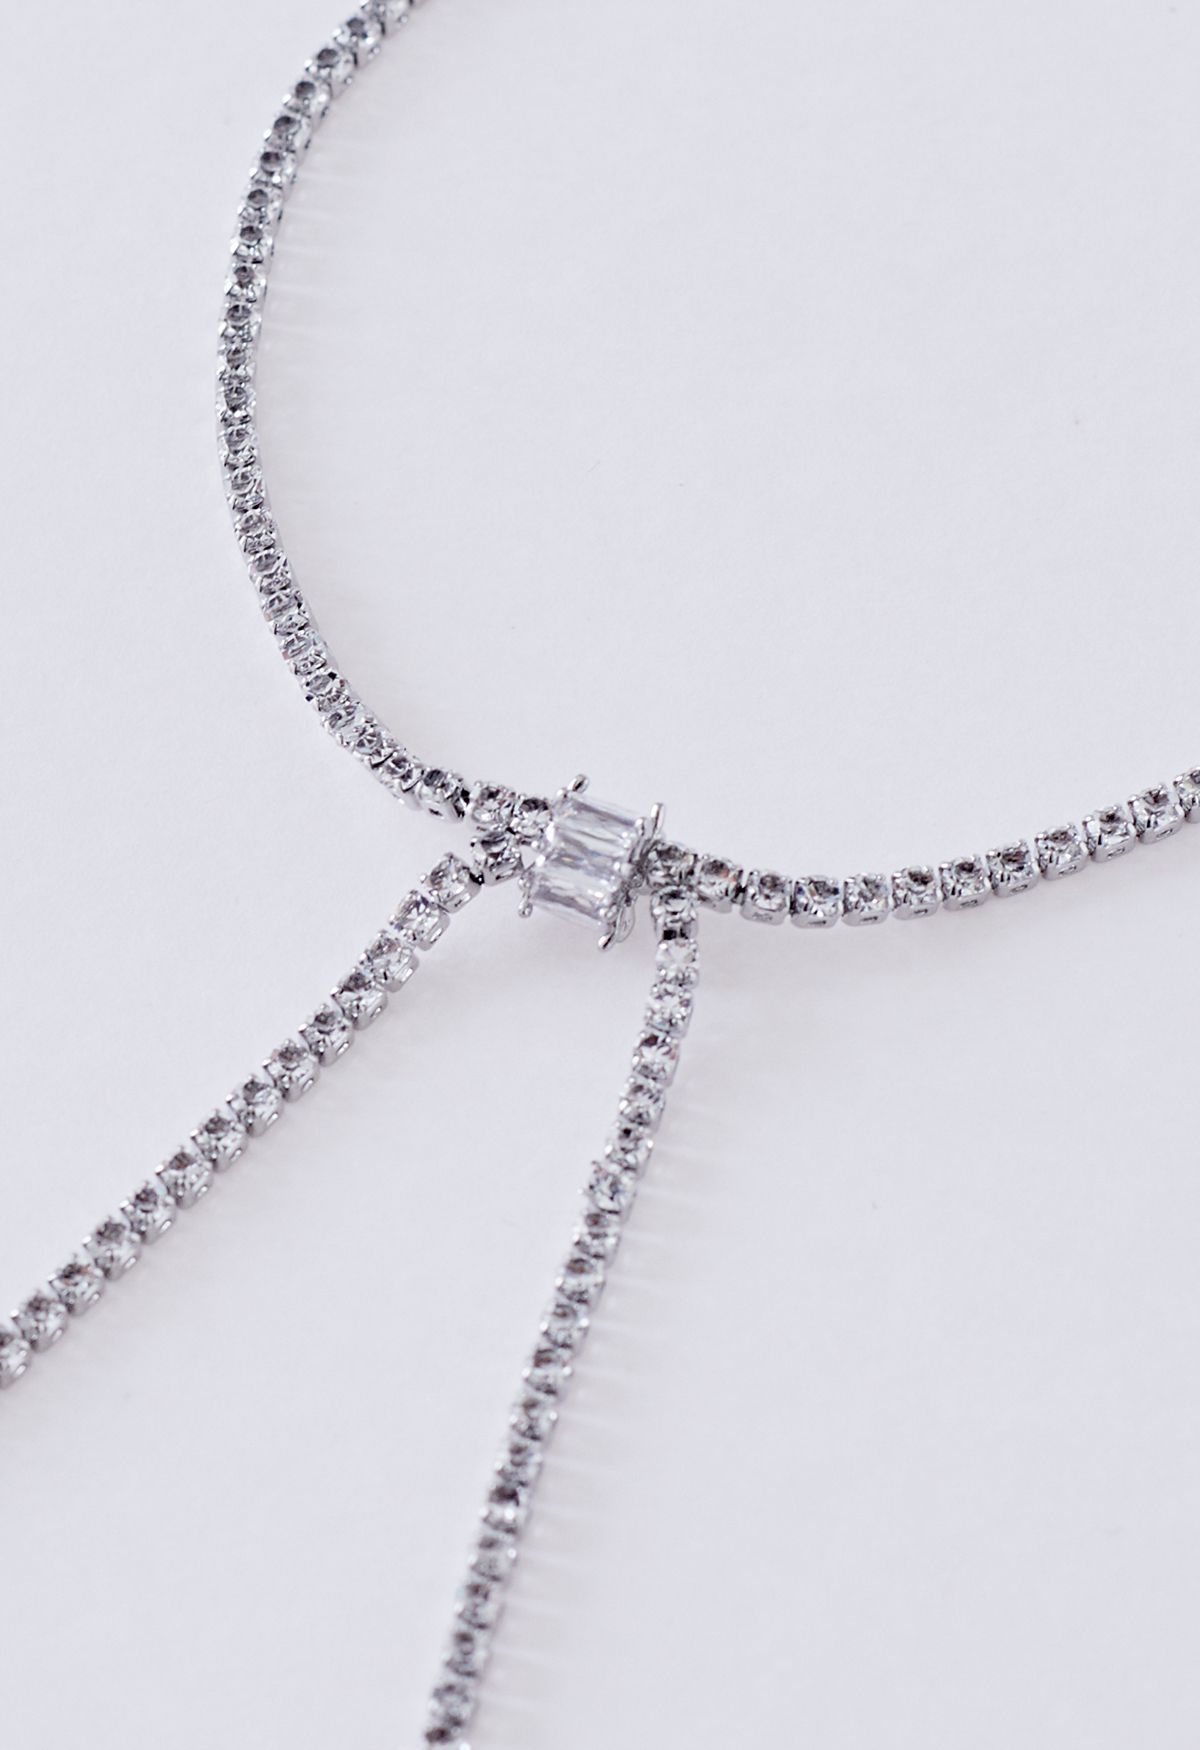 Full Diamond Knotted Clavicle Necklace